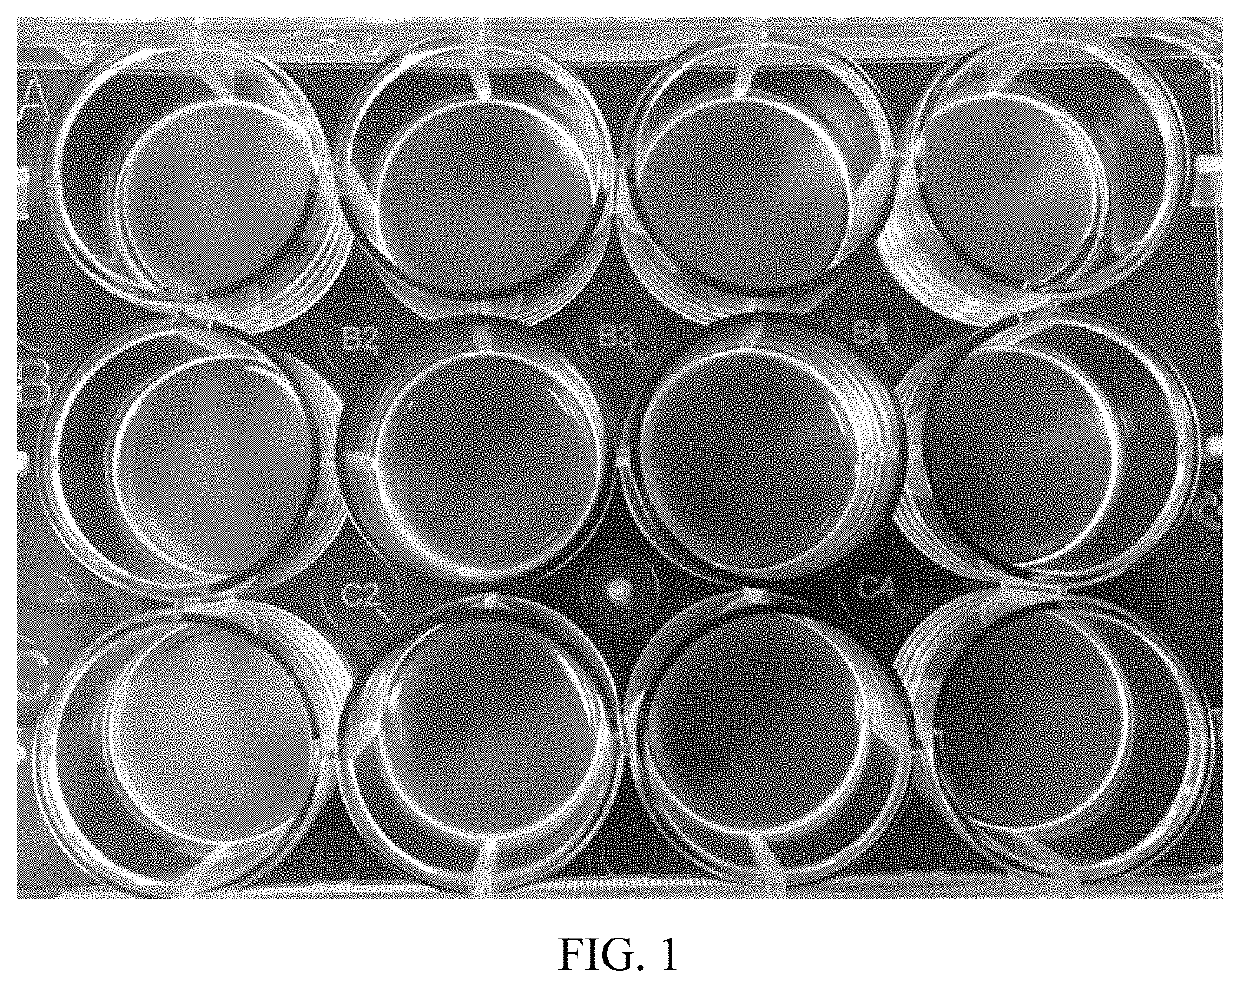 Method for circulating tumor cells isolation